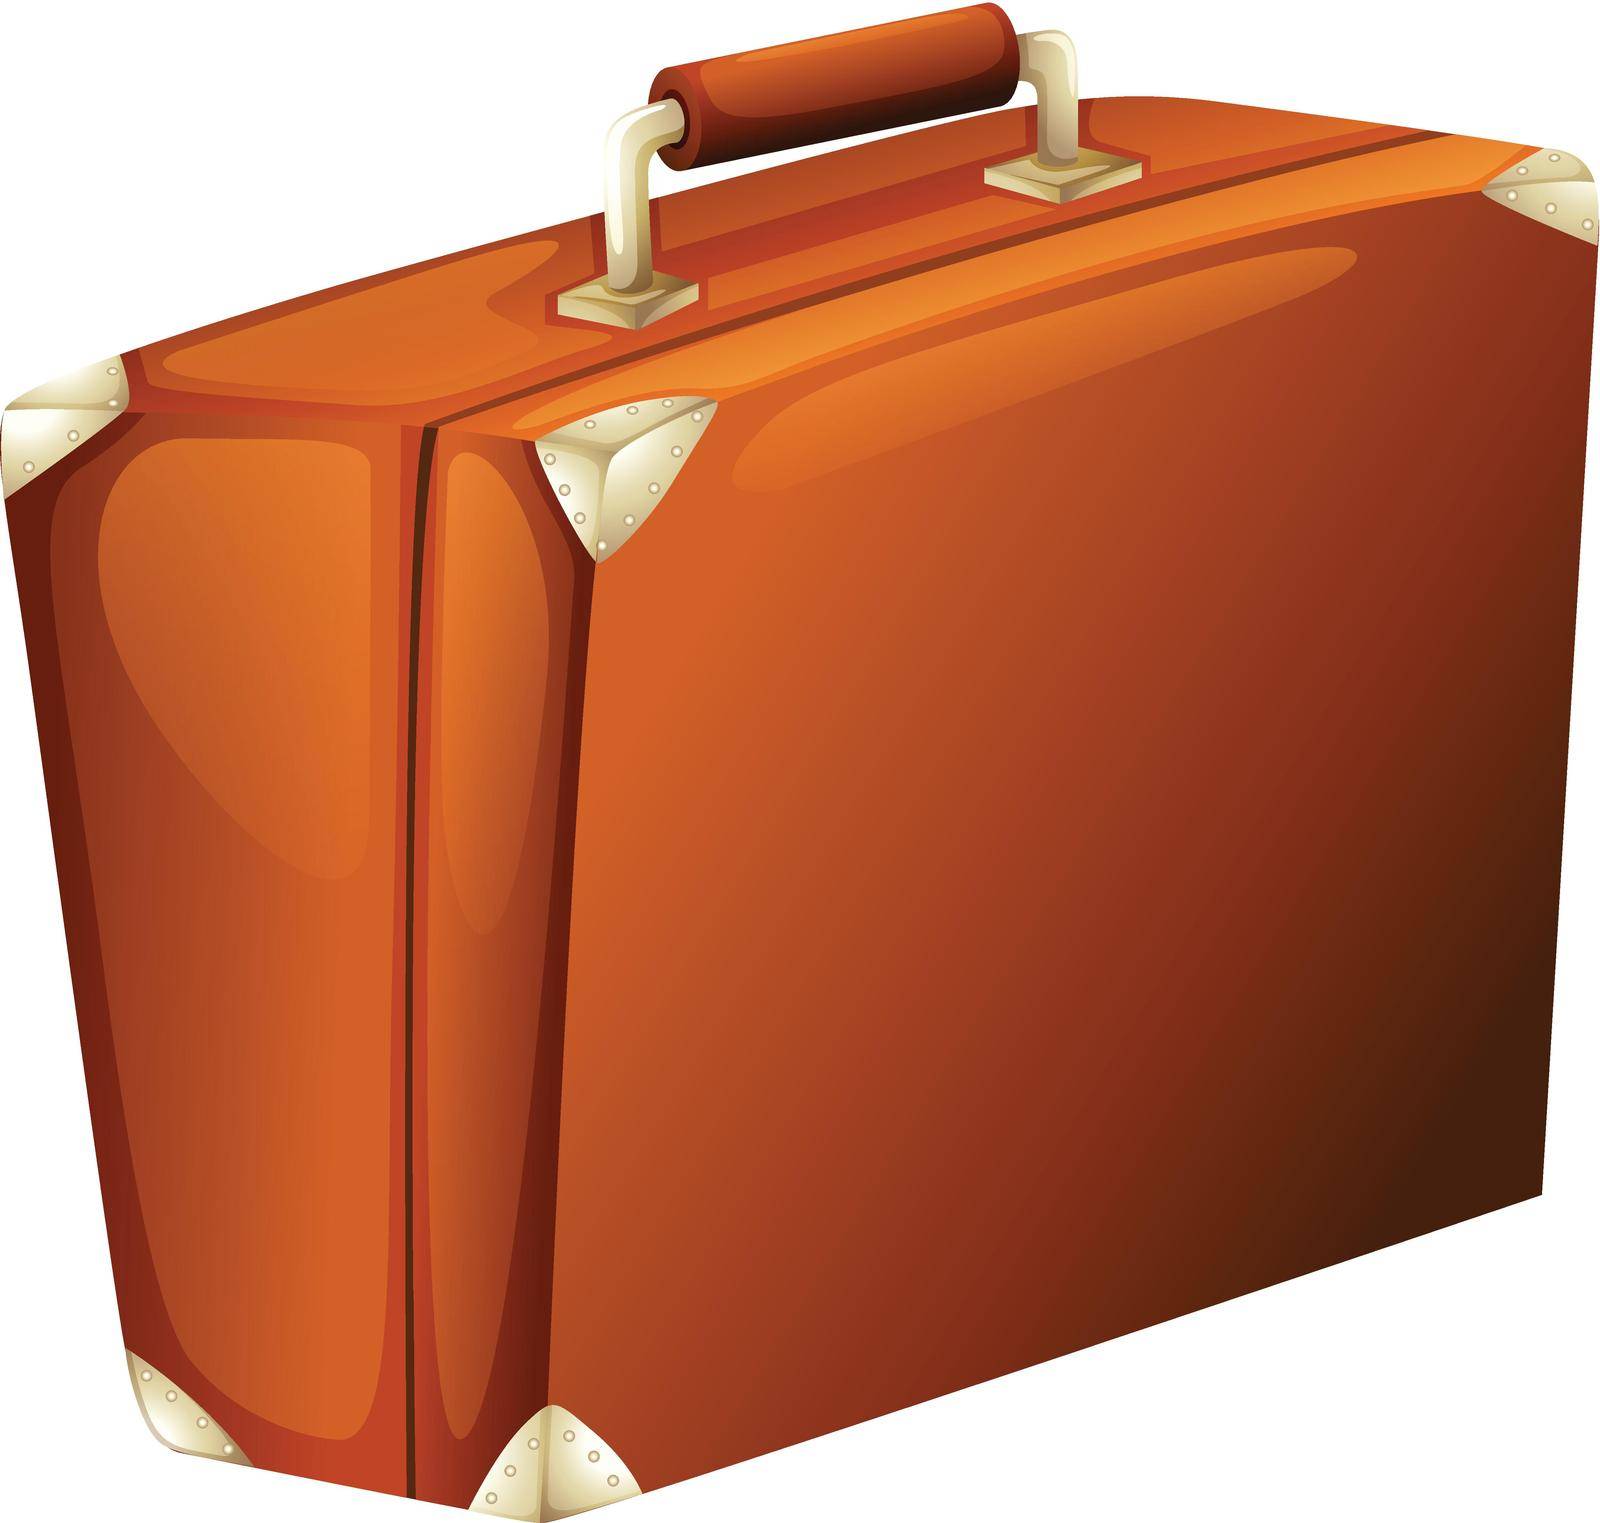 Illustration of a travelling suitcase on a white background